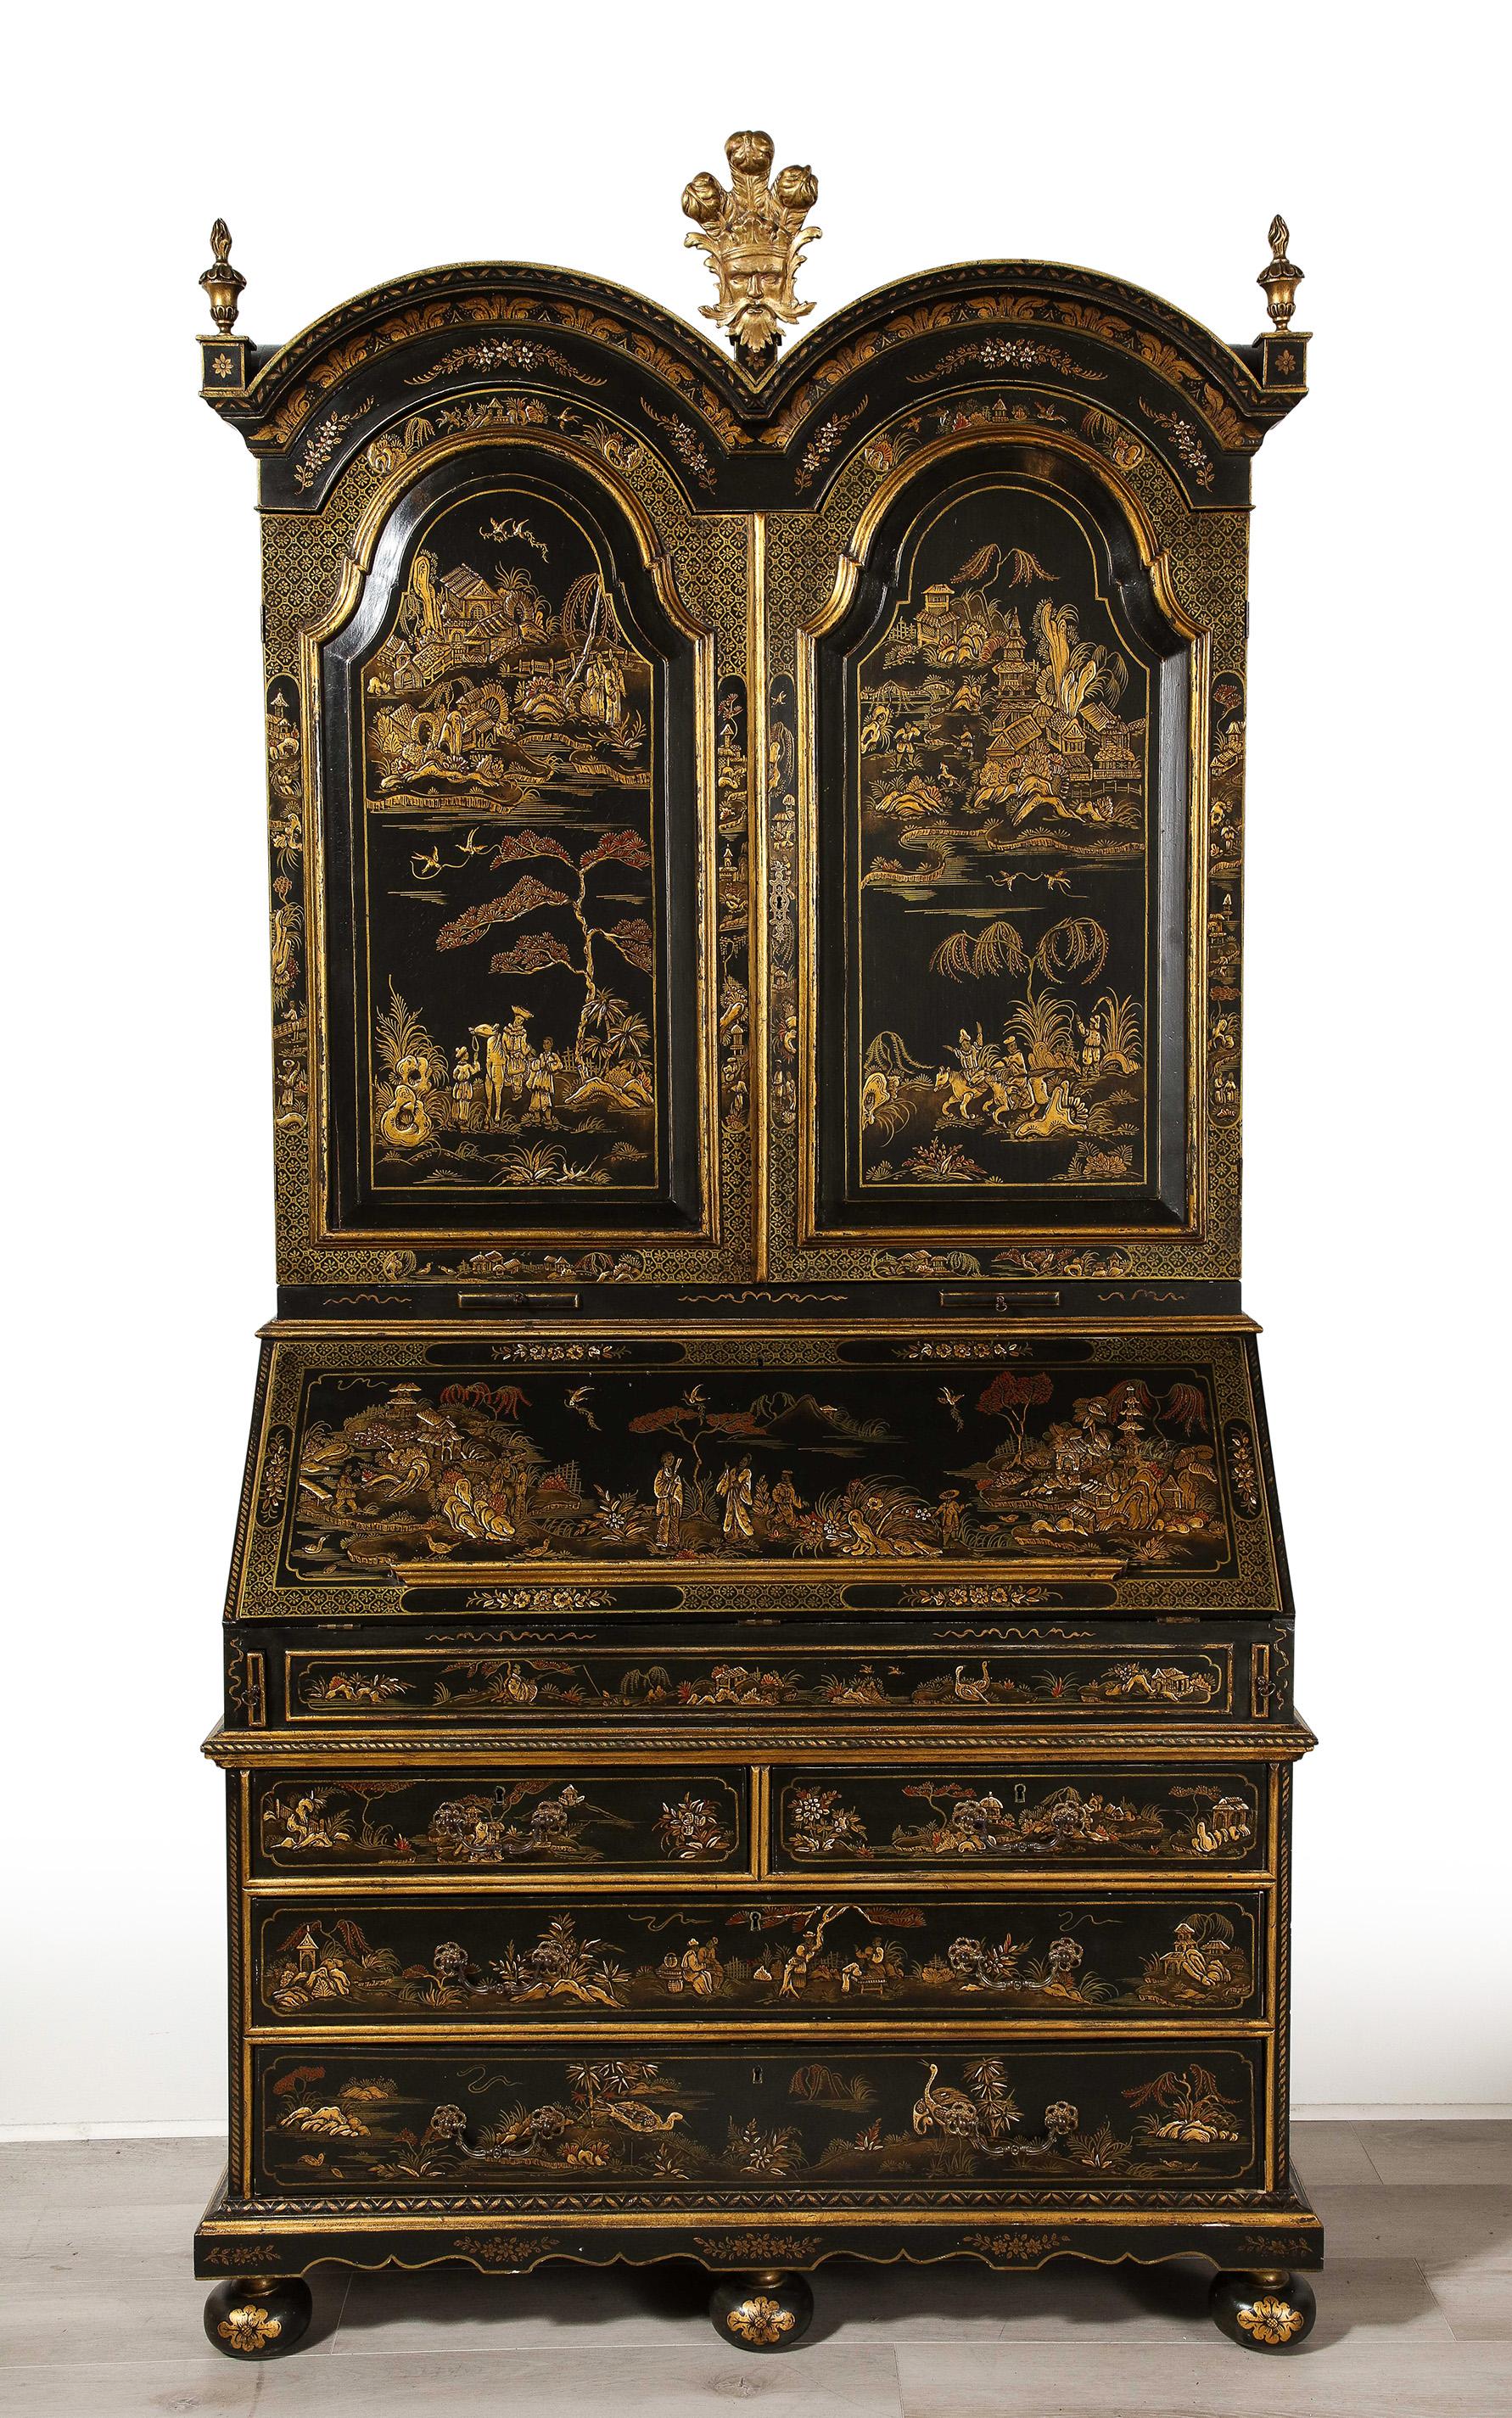 This impressive  and grand Chinoiserie Secretary having an intricate detailed decoration both on the exterior and interior, the top section with  2 doors opening to reveal a fitted interior with many hidden drawers and compartments, over a fall